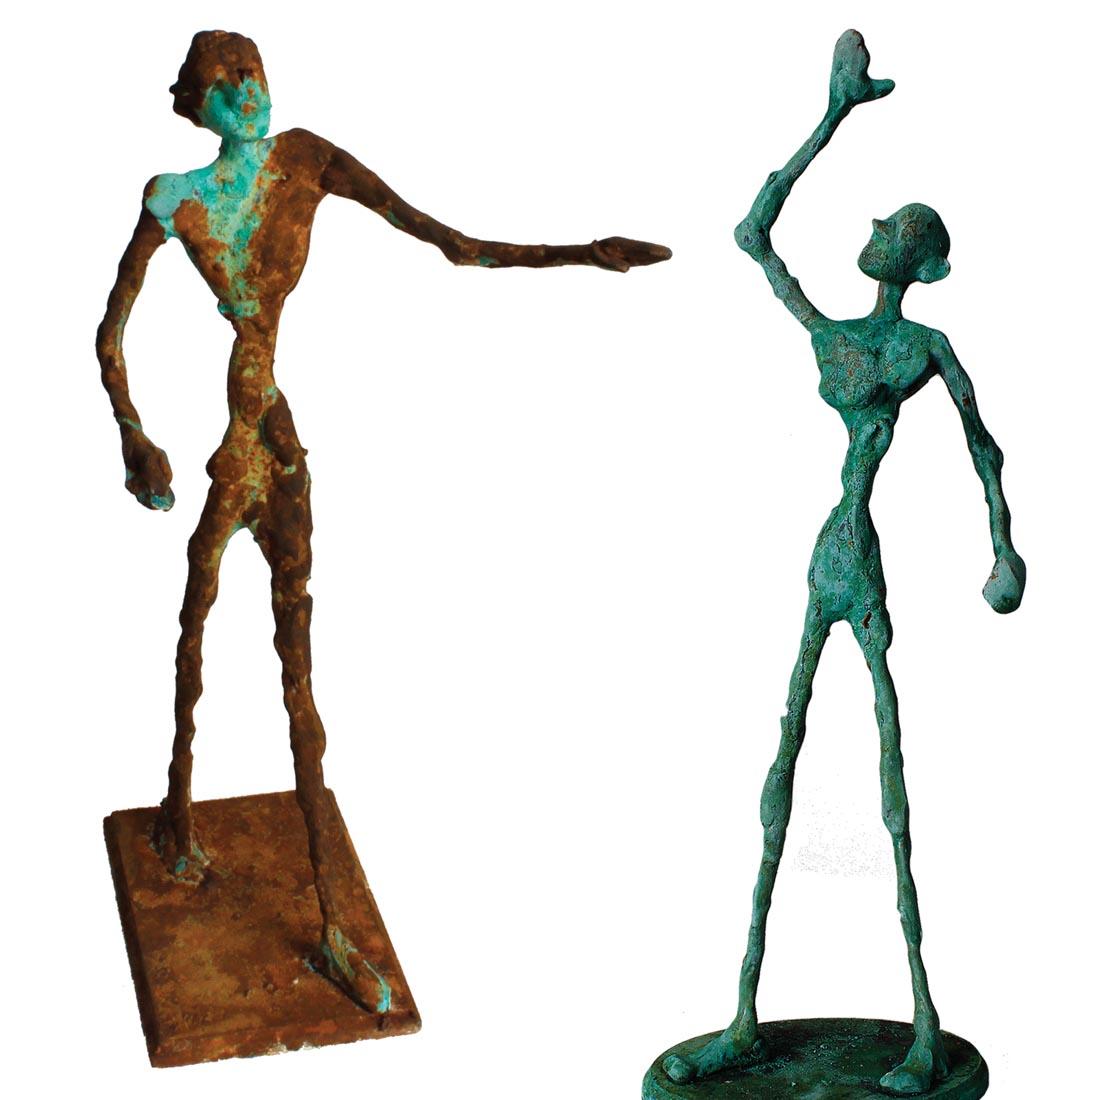 Two completed projects made from the Giacometti-Inspired Sculpture Project Kit